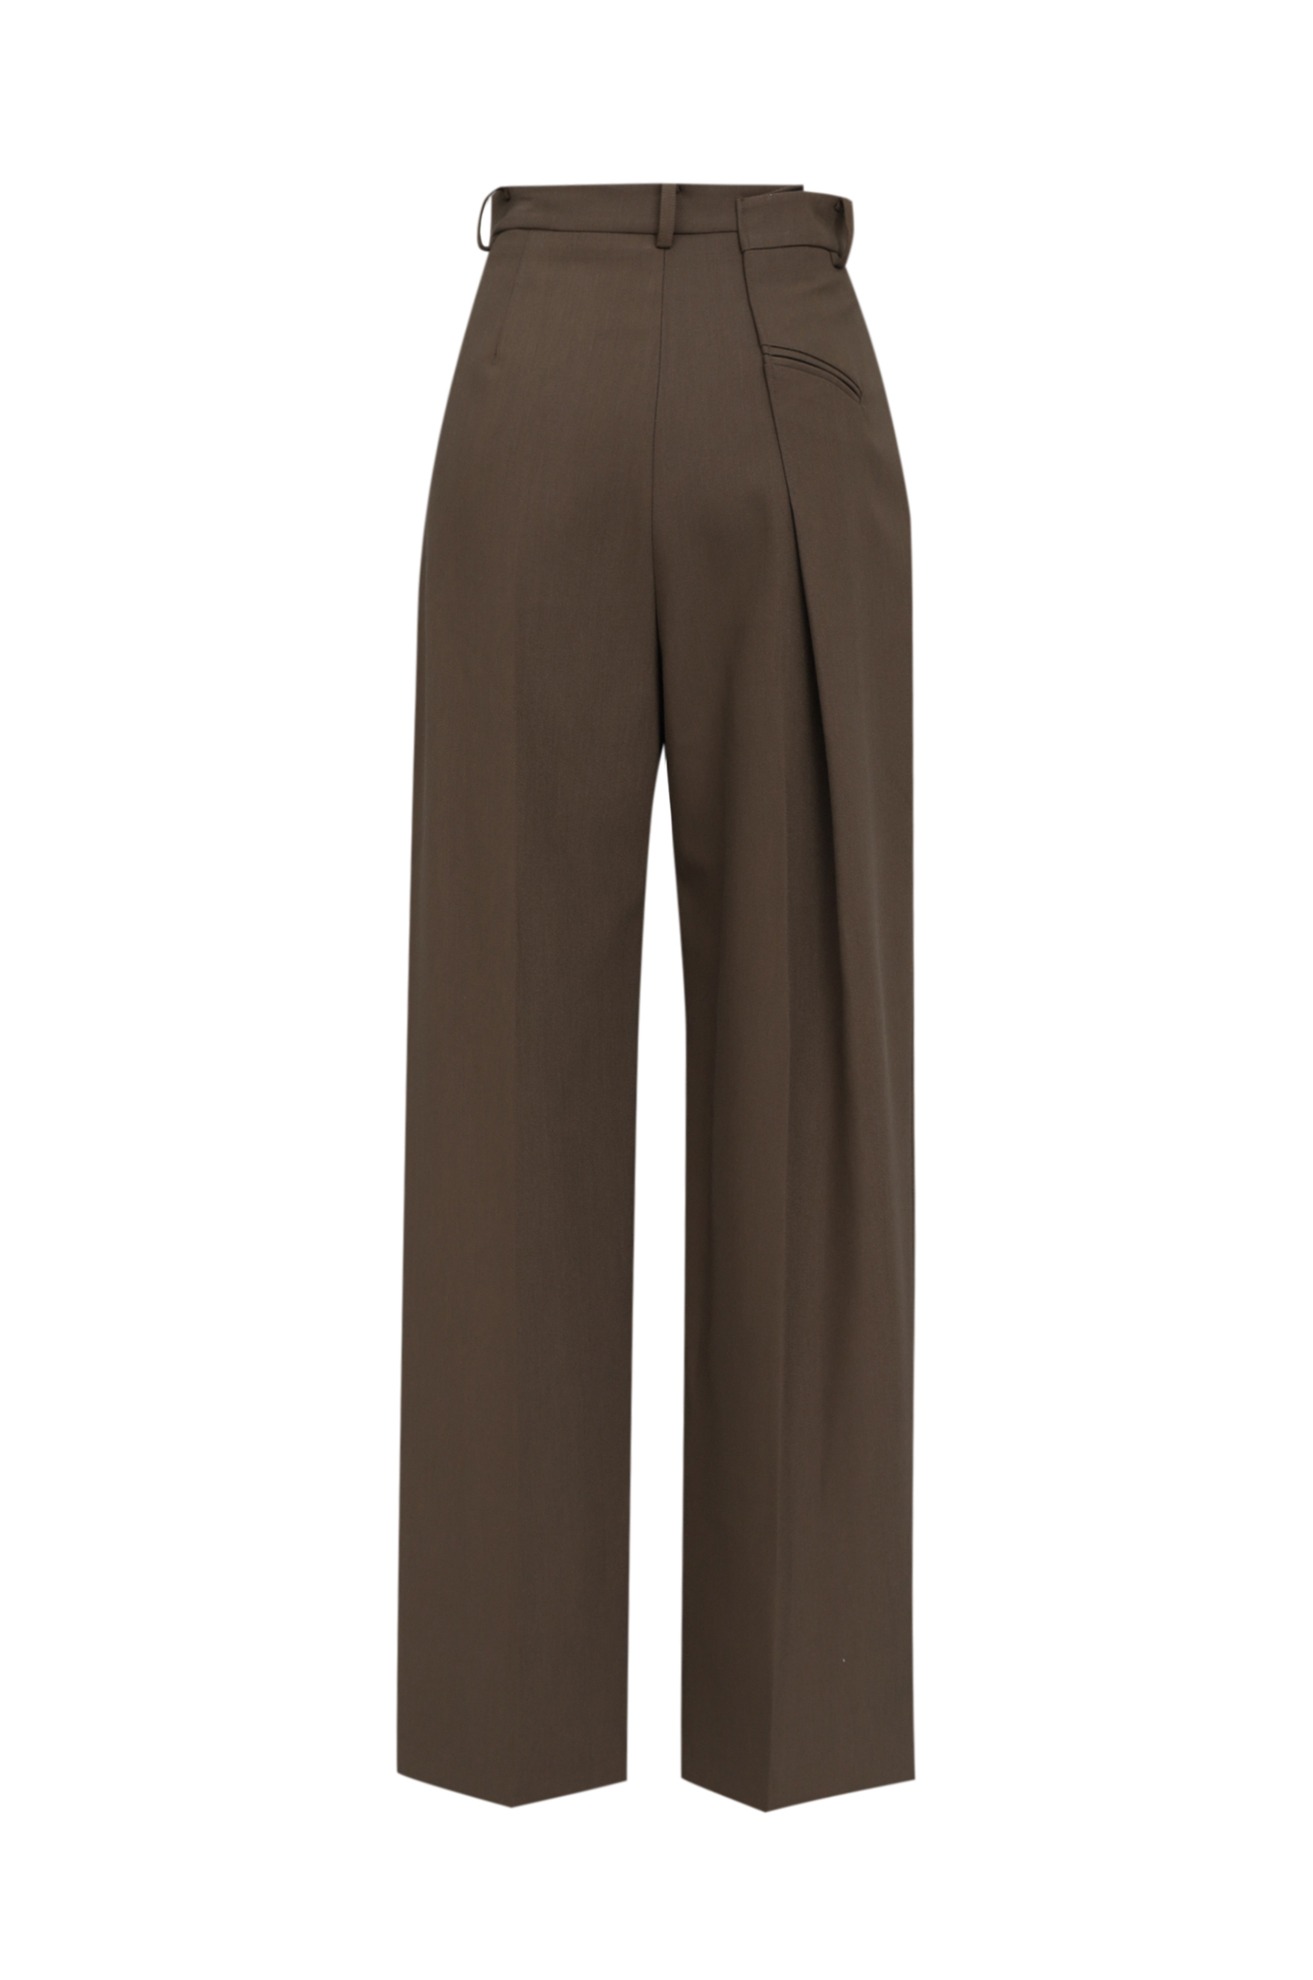 Asymmetrically Pleated Trousers  10/31 순차발송